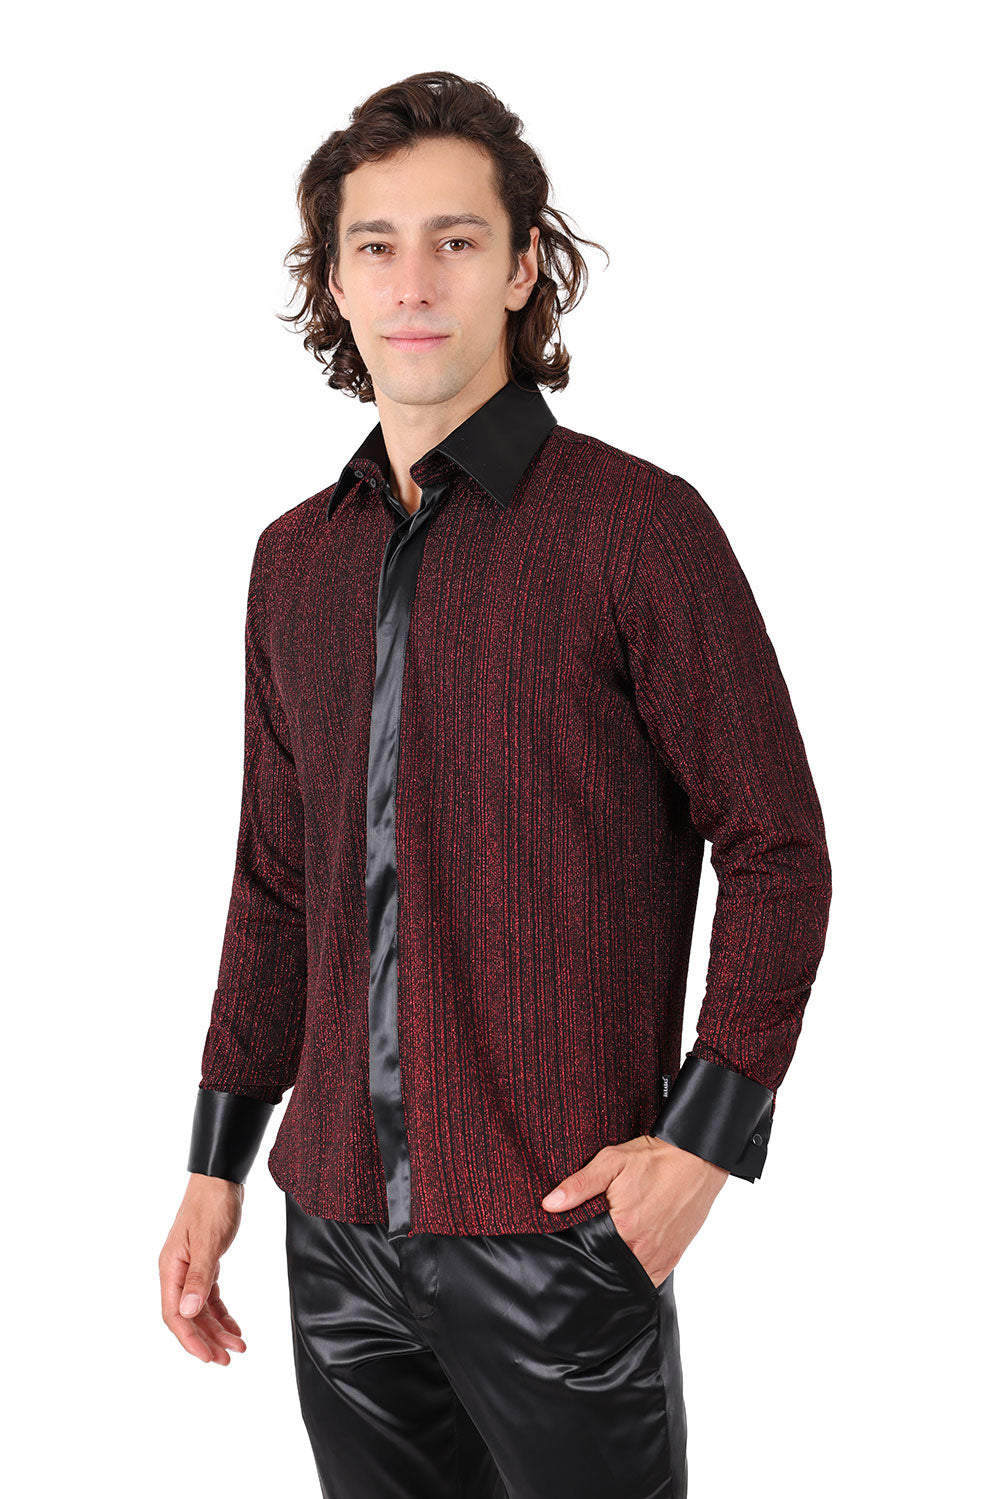 Barabas Men's French Cuff Long Sleeve Button Down Shirt 2FCS10002 Red Black